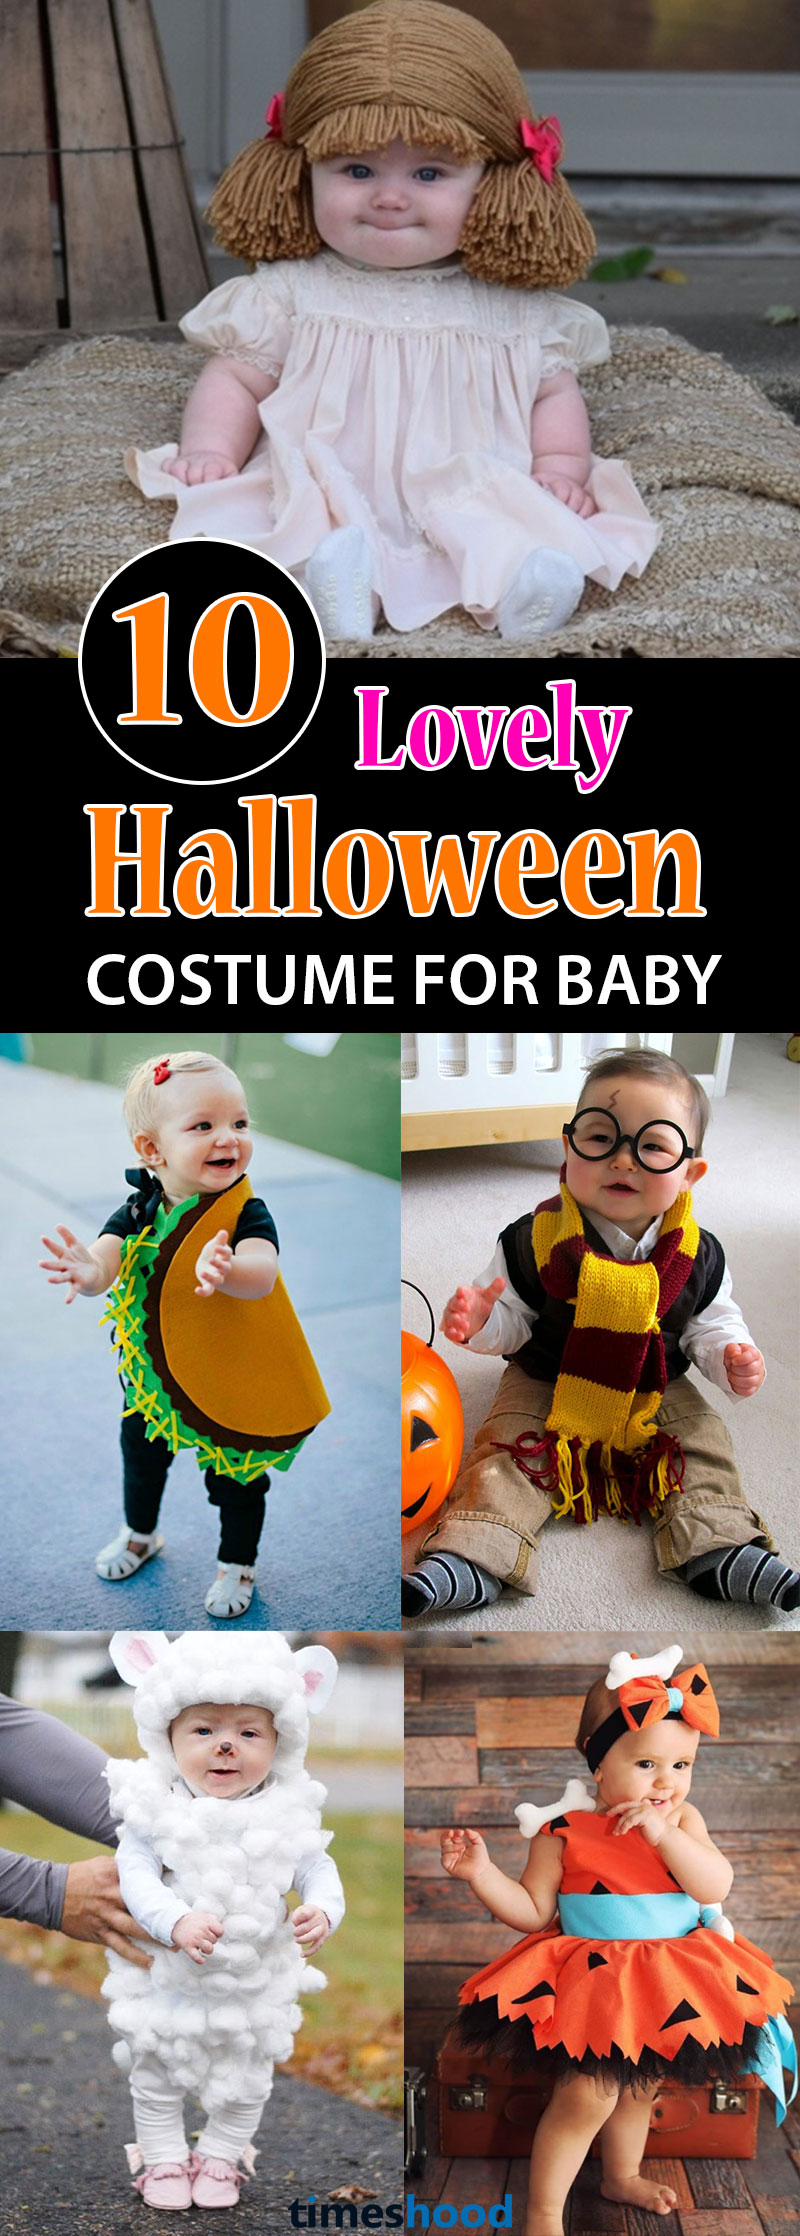 Get your little ones dressed up for Halloween party with these incredibly cute costumes ideas. Sure these Halloween costumes ideas can turn may faces around as they are so adorable and fancy. Halloween costume for kids on Amazon.